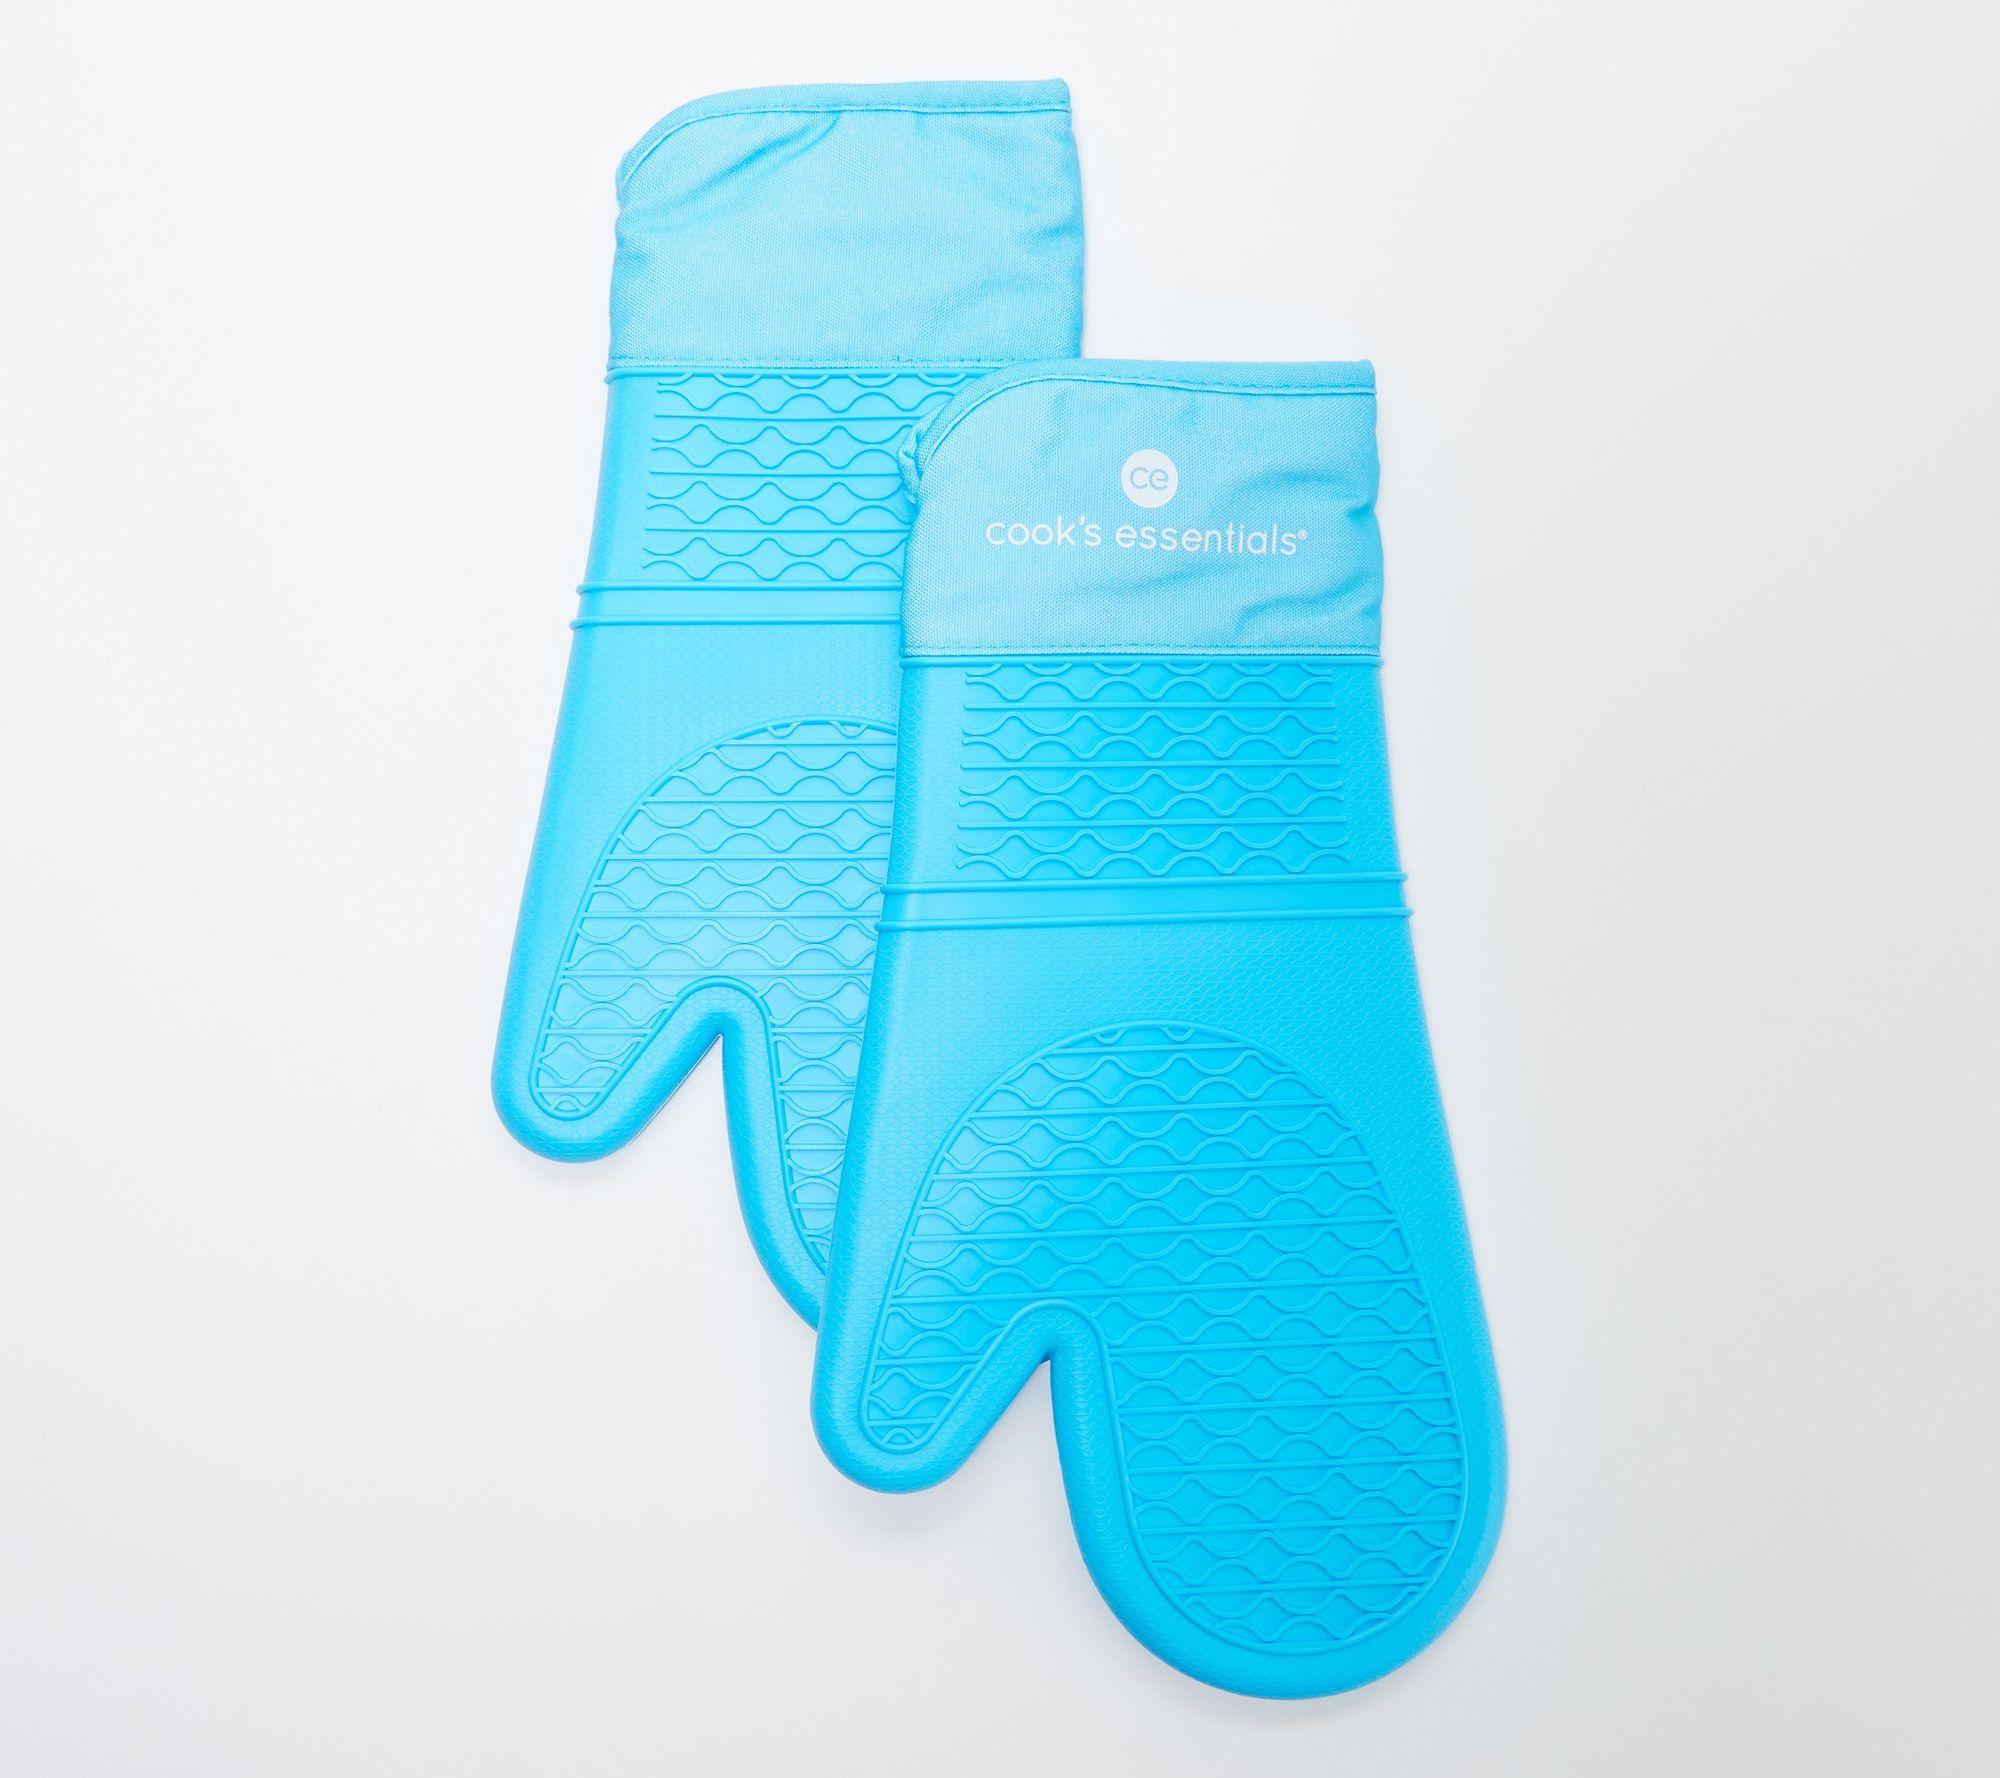 New All-Clad Luxury Silicone Cotton Set of 2 Oven Mitts Teal Blue  (Cornflower)